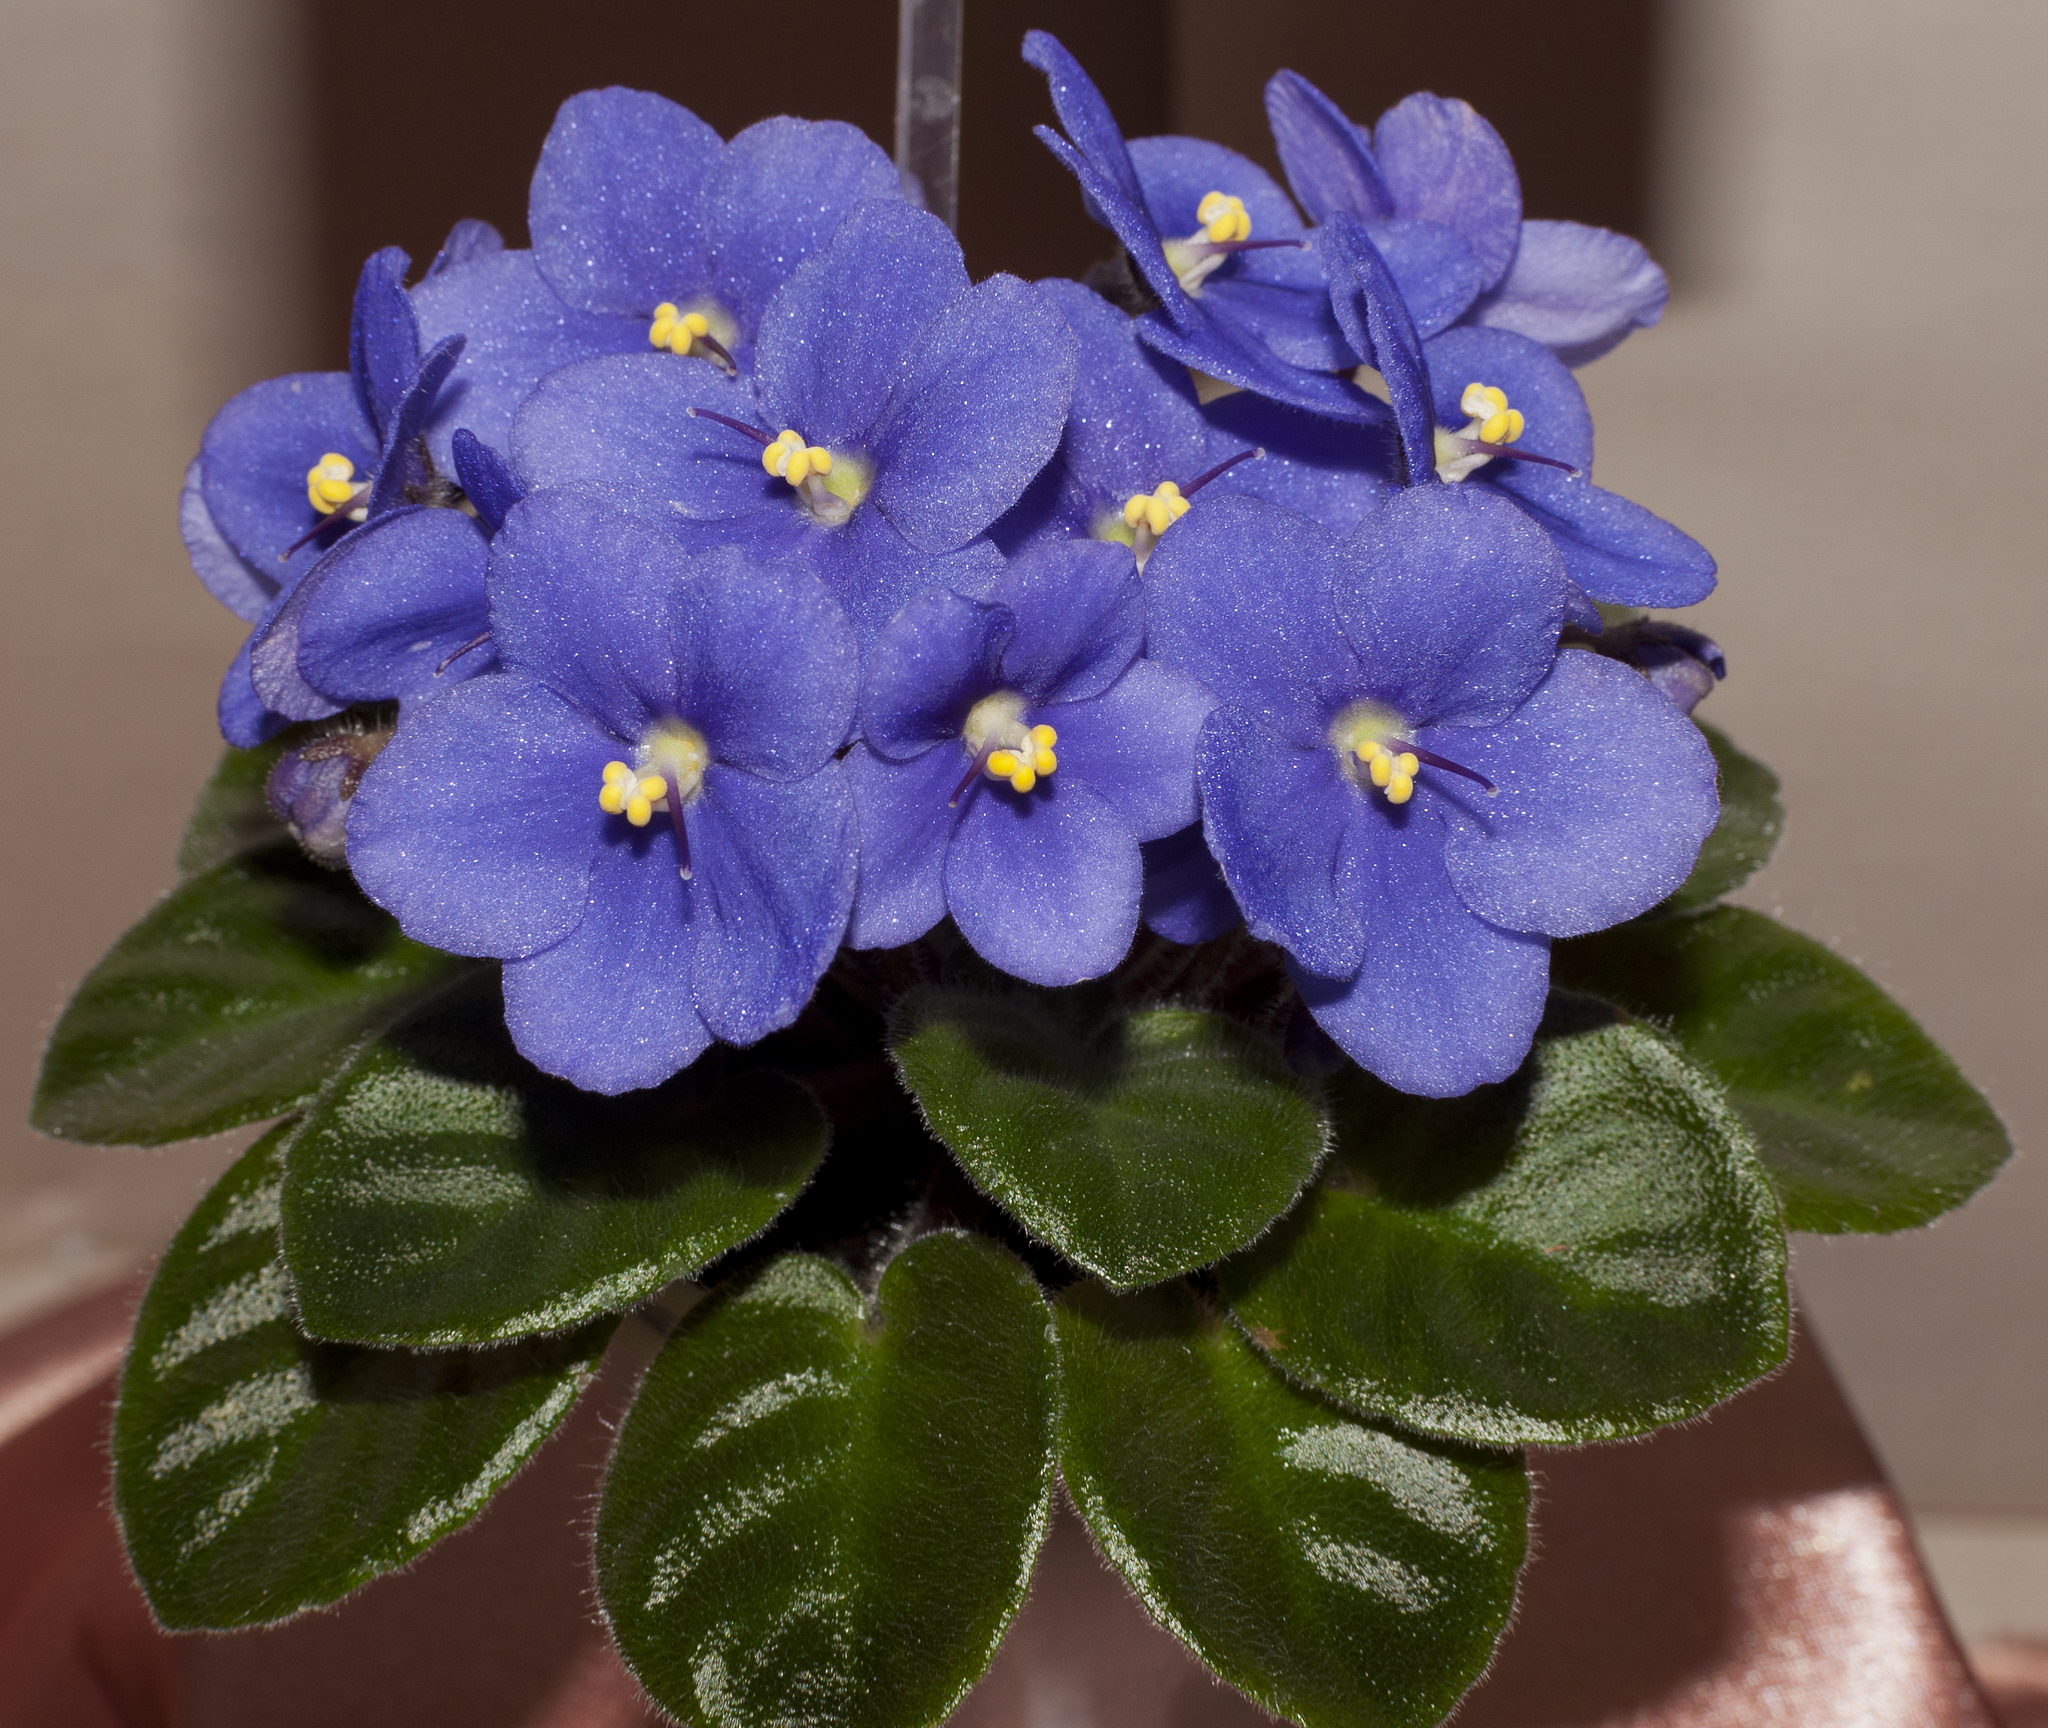 Give charming winter-blooming plants as holiday gifts